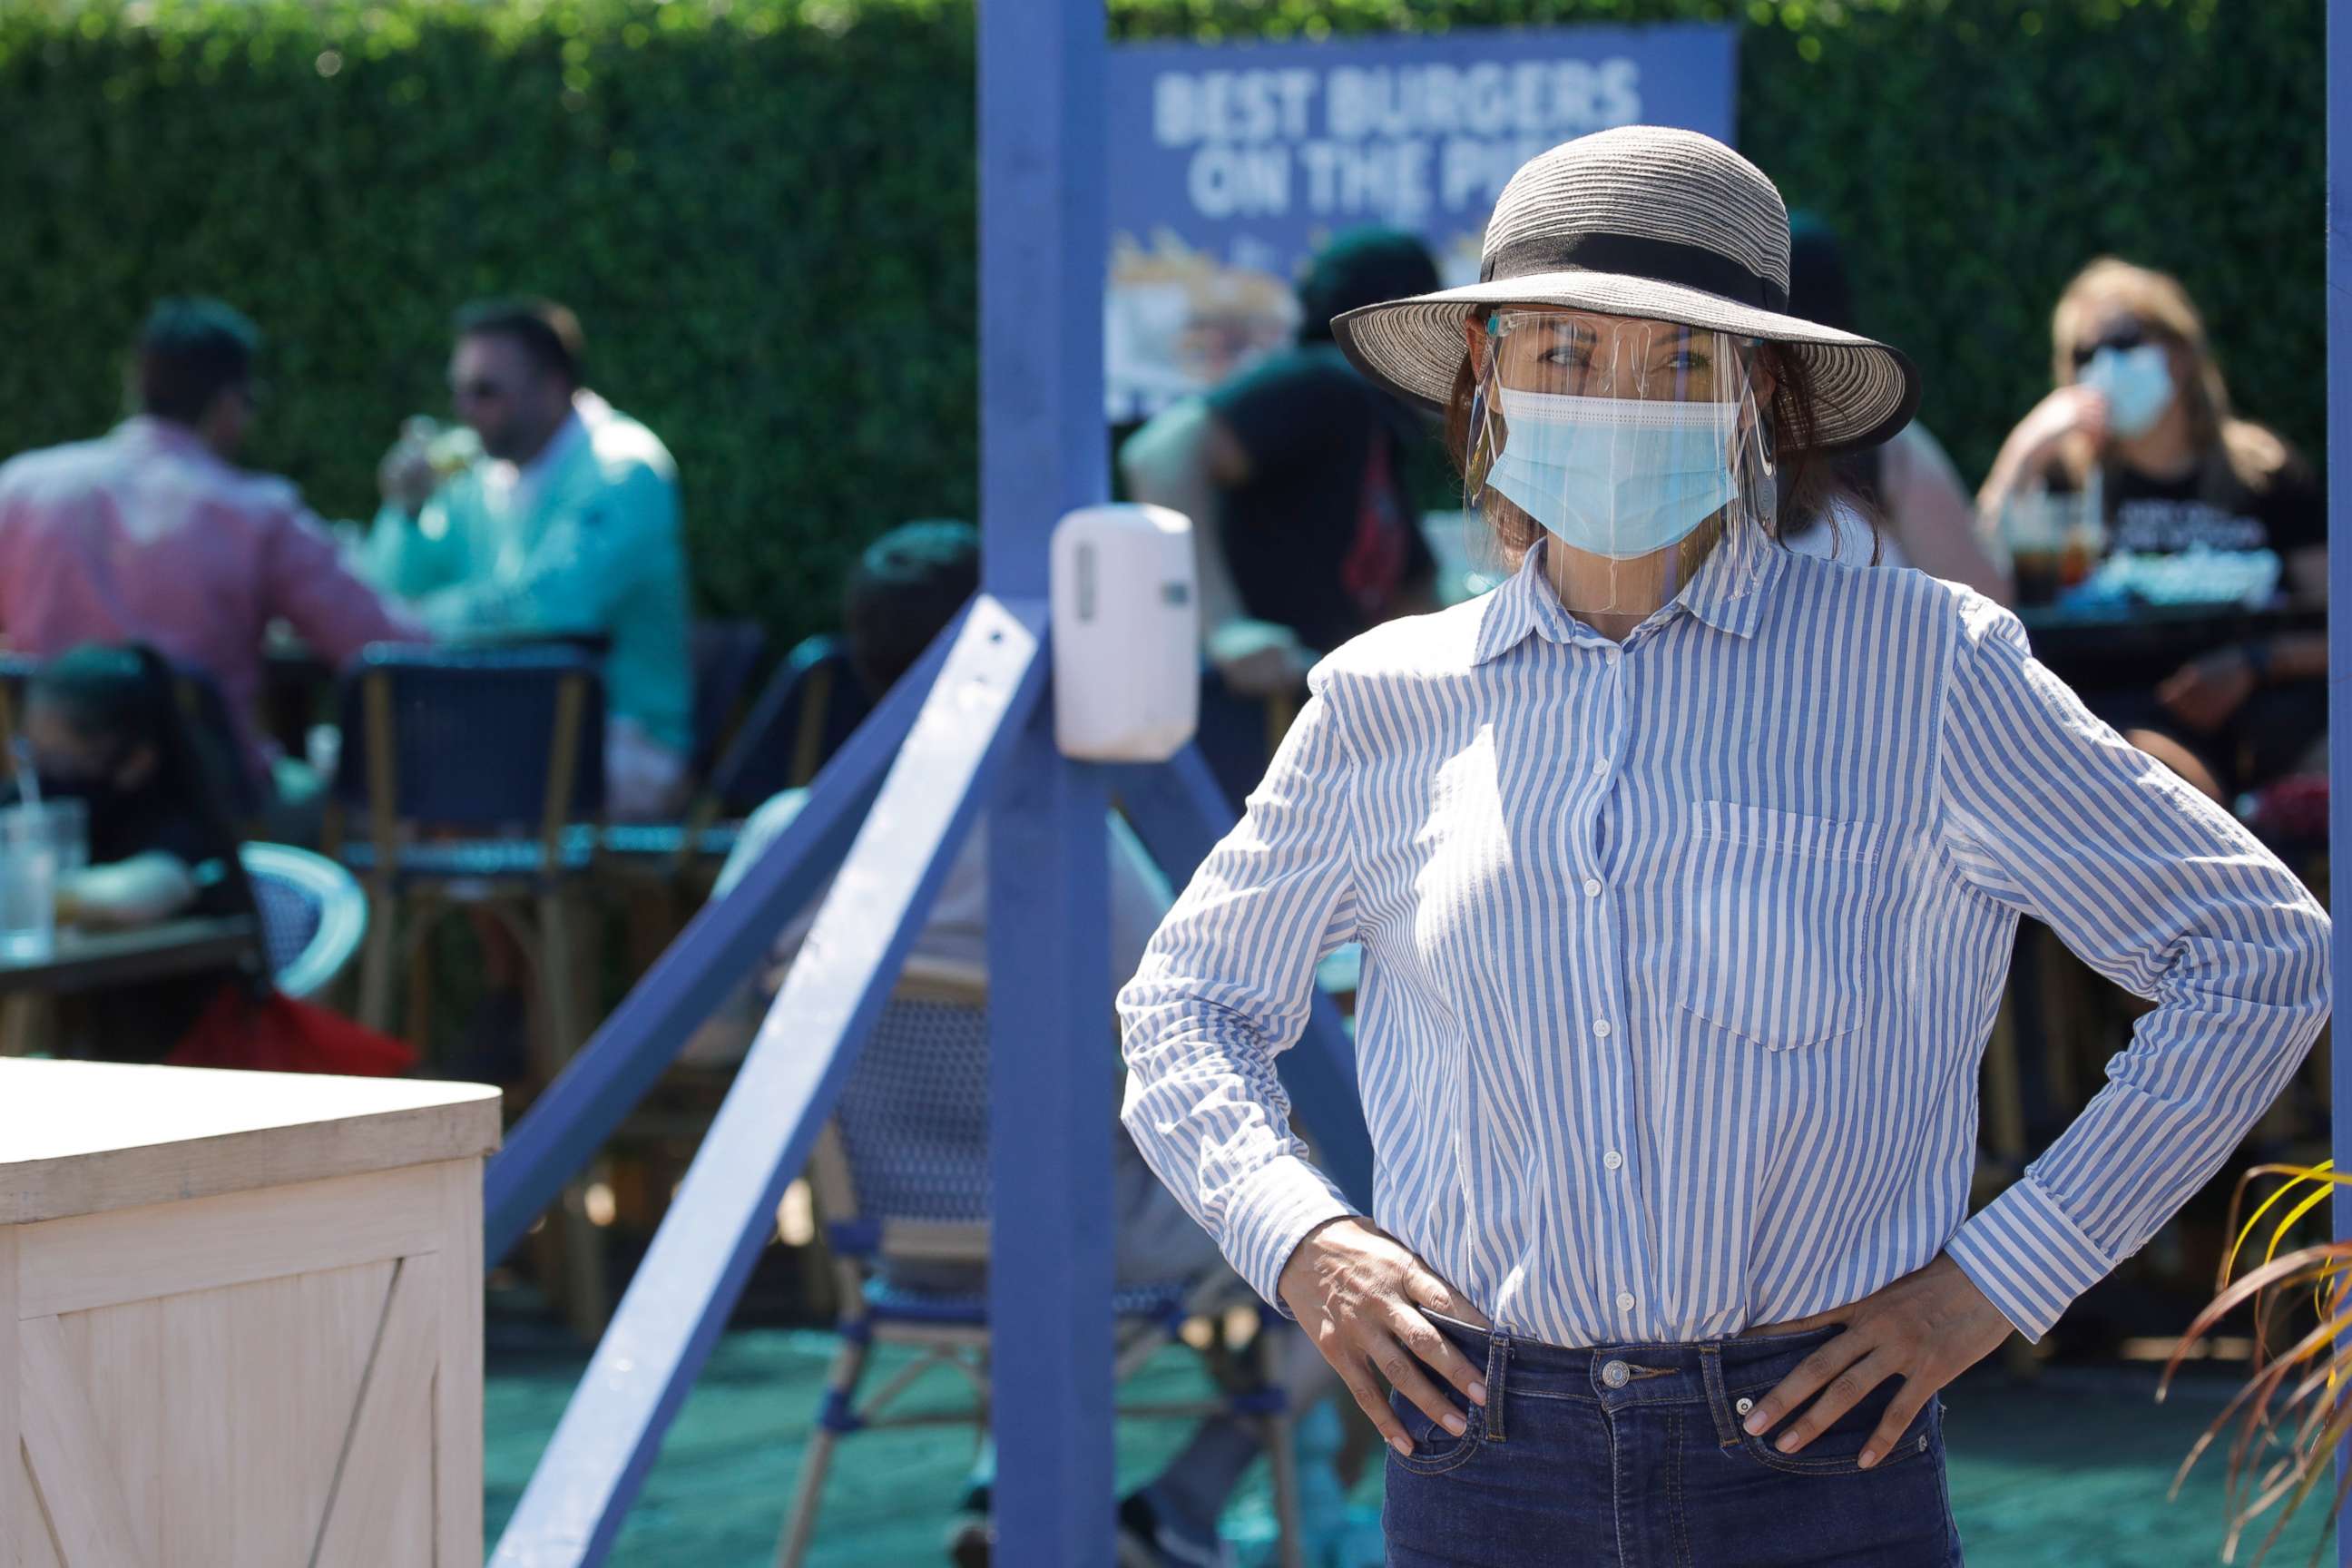 PHOTO: A hostess waits to sit customers at a restaurant on the pier, July 12, 2020, in Santa Monica, Calif., amid the coronavirus pandemic.